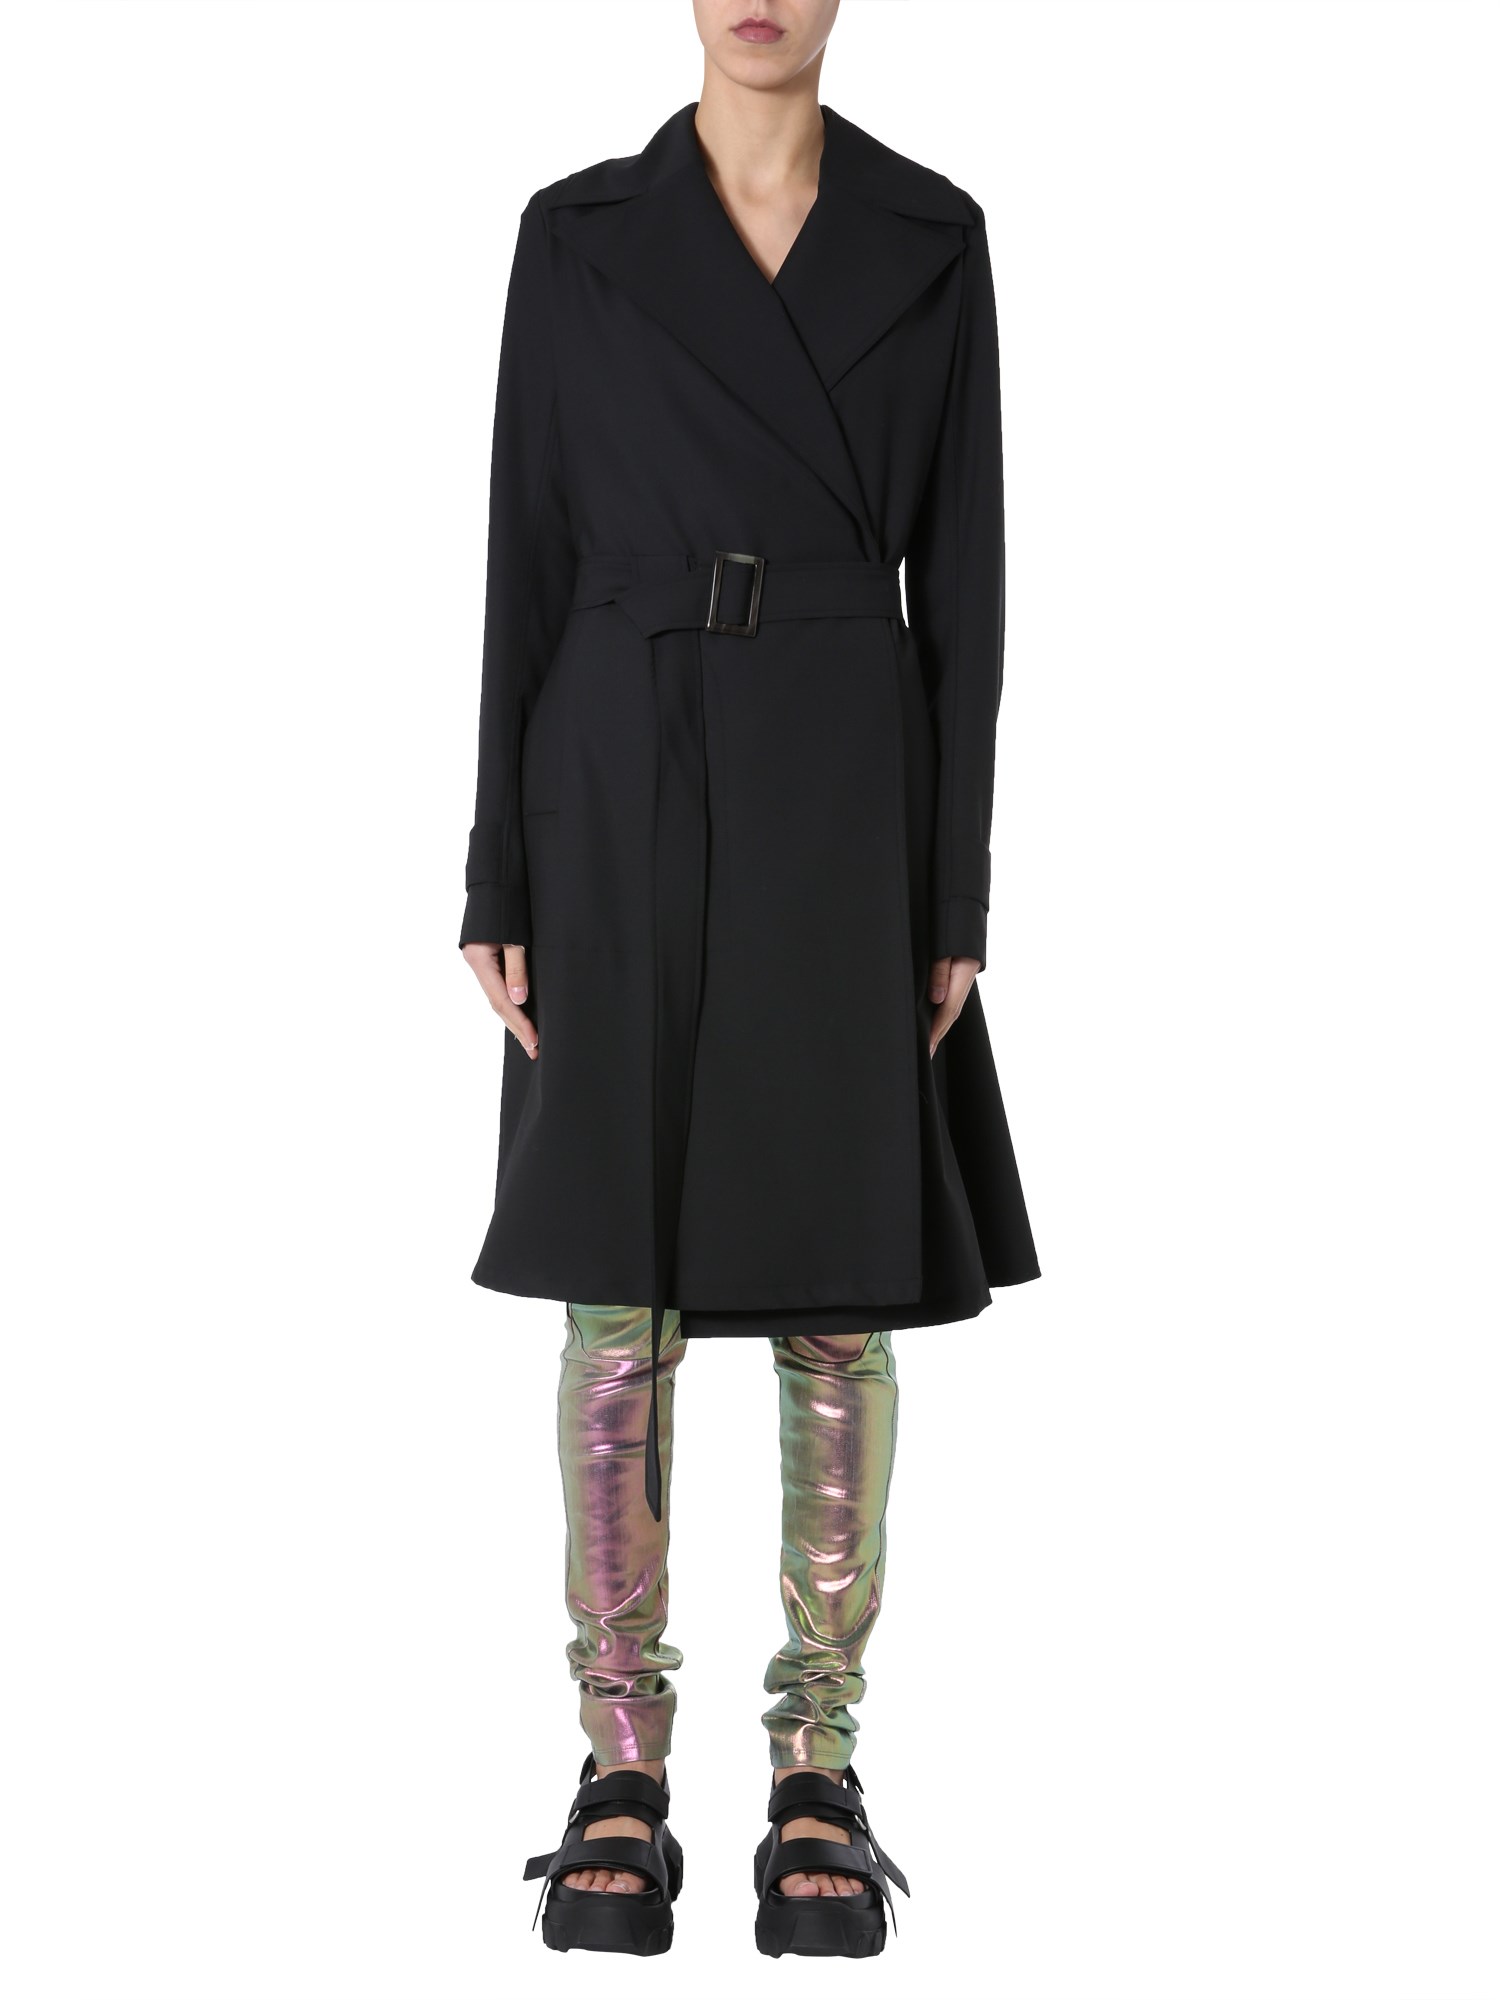 RICK OWENS "SOFT"TRENCH,177207